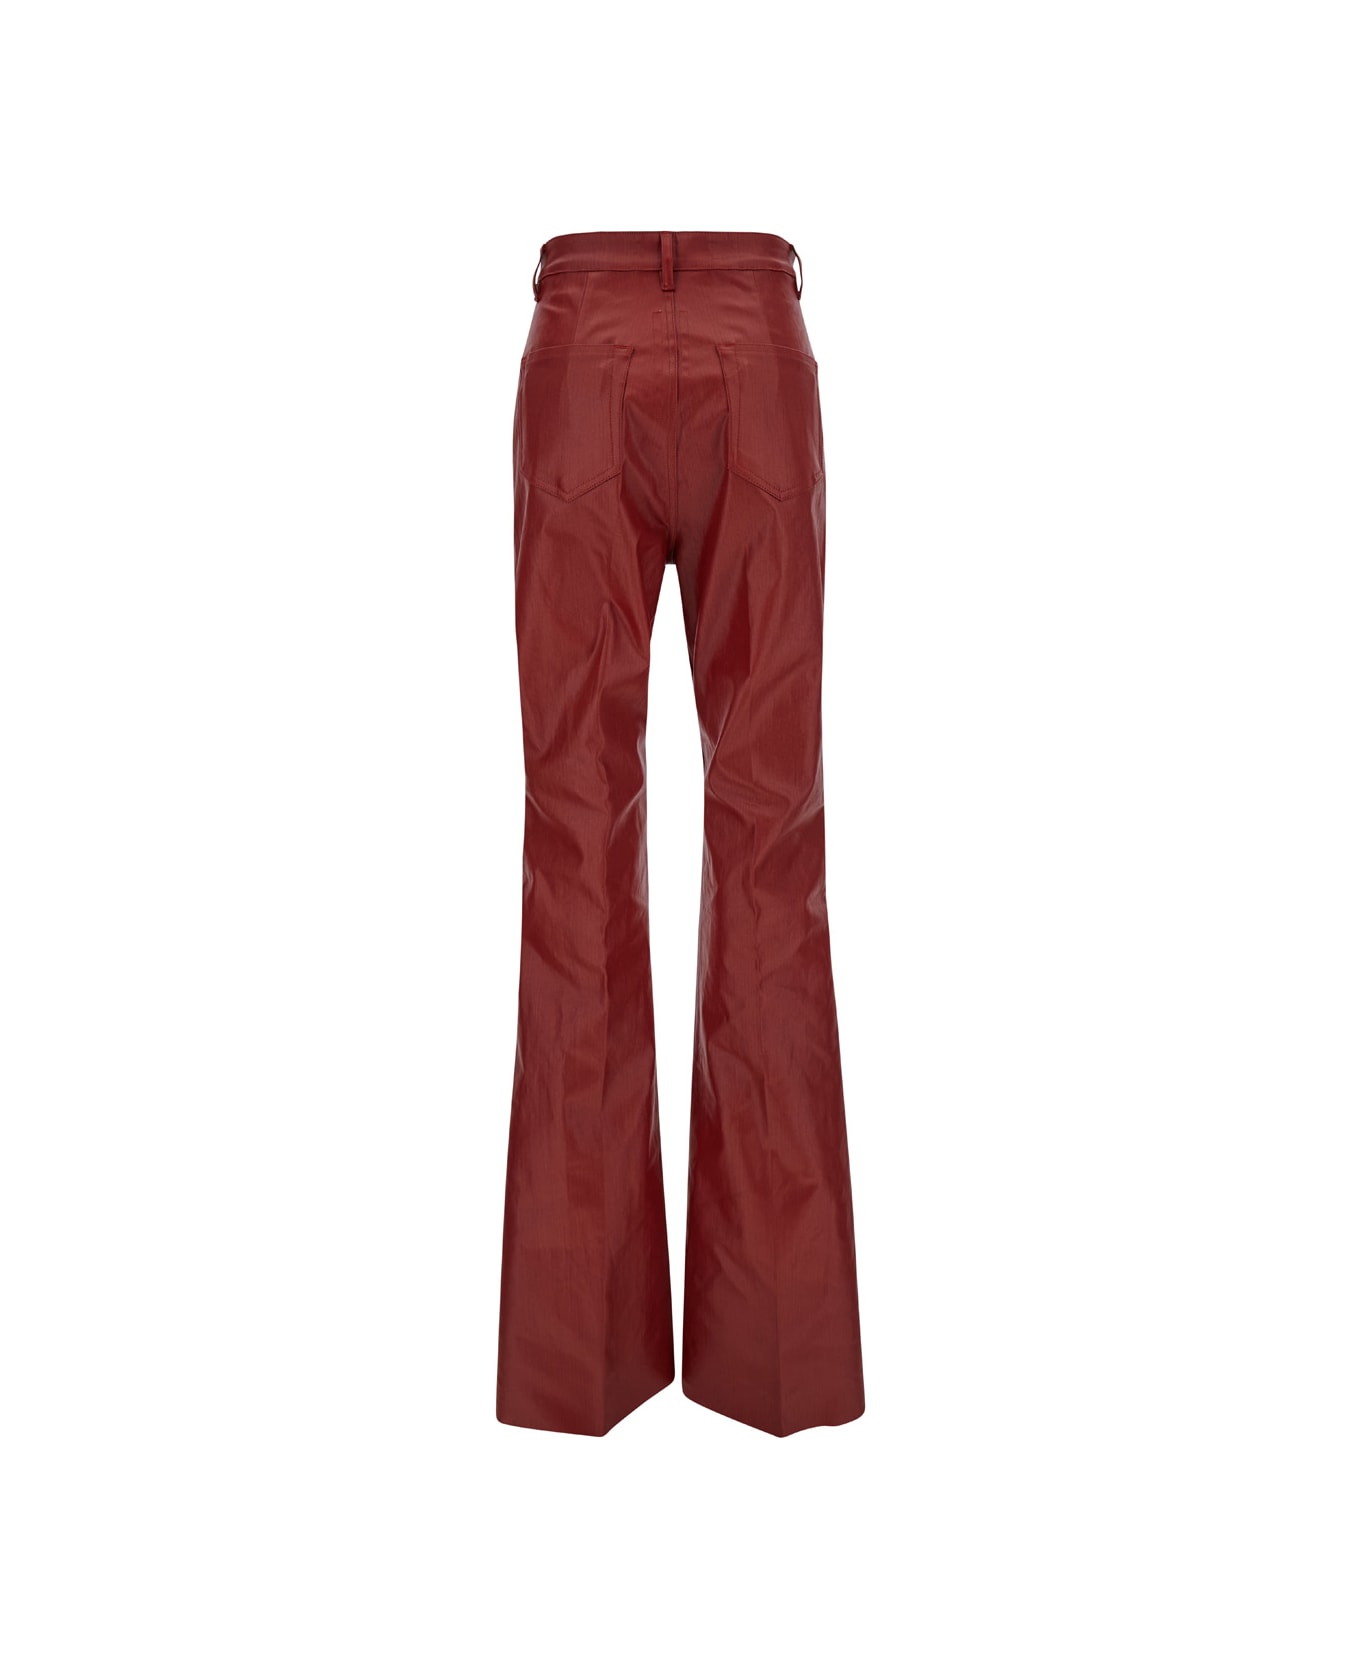 Rick Owens Red Flared High Waist Pants In Cotton Blend Woman - Red